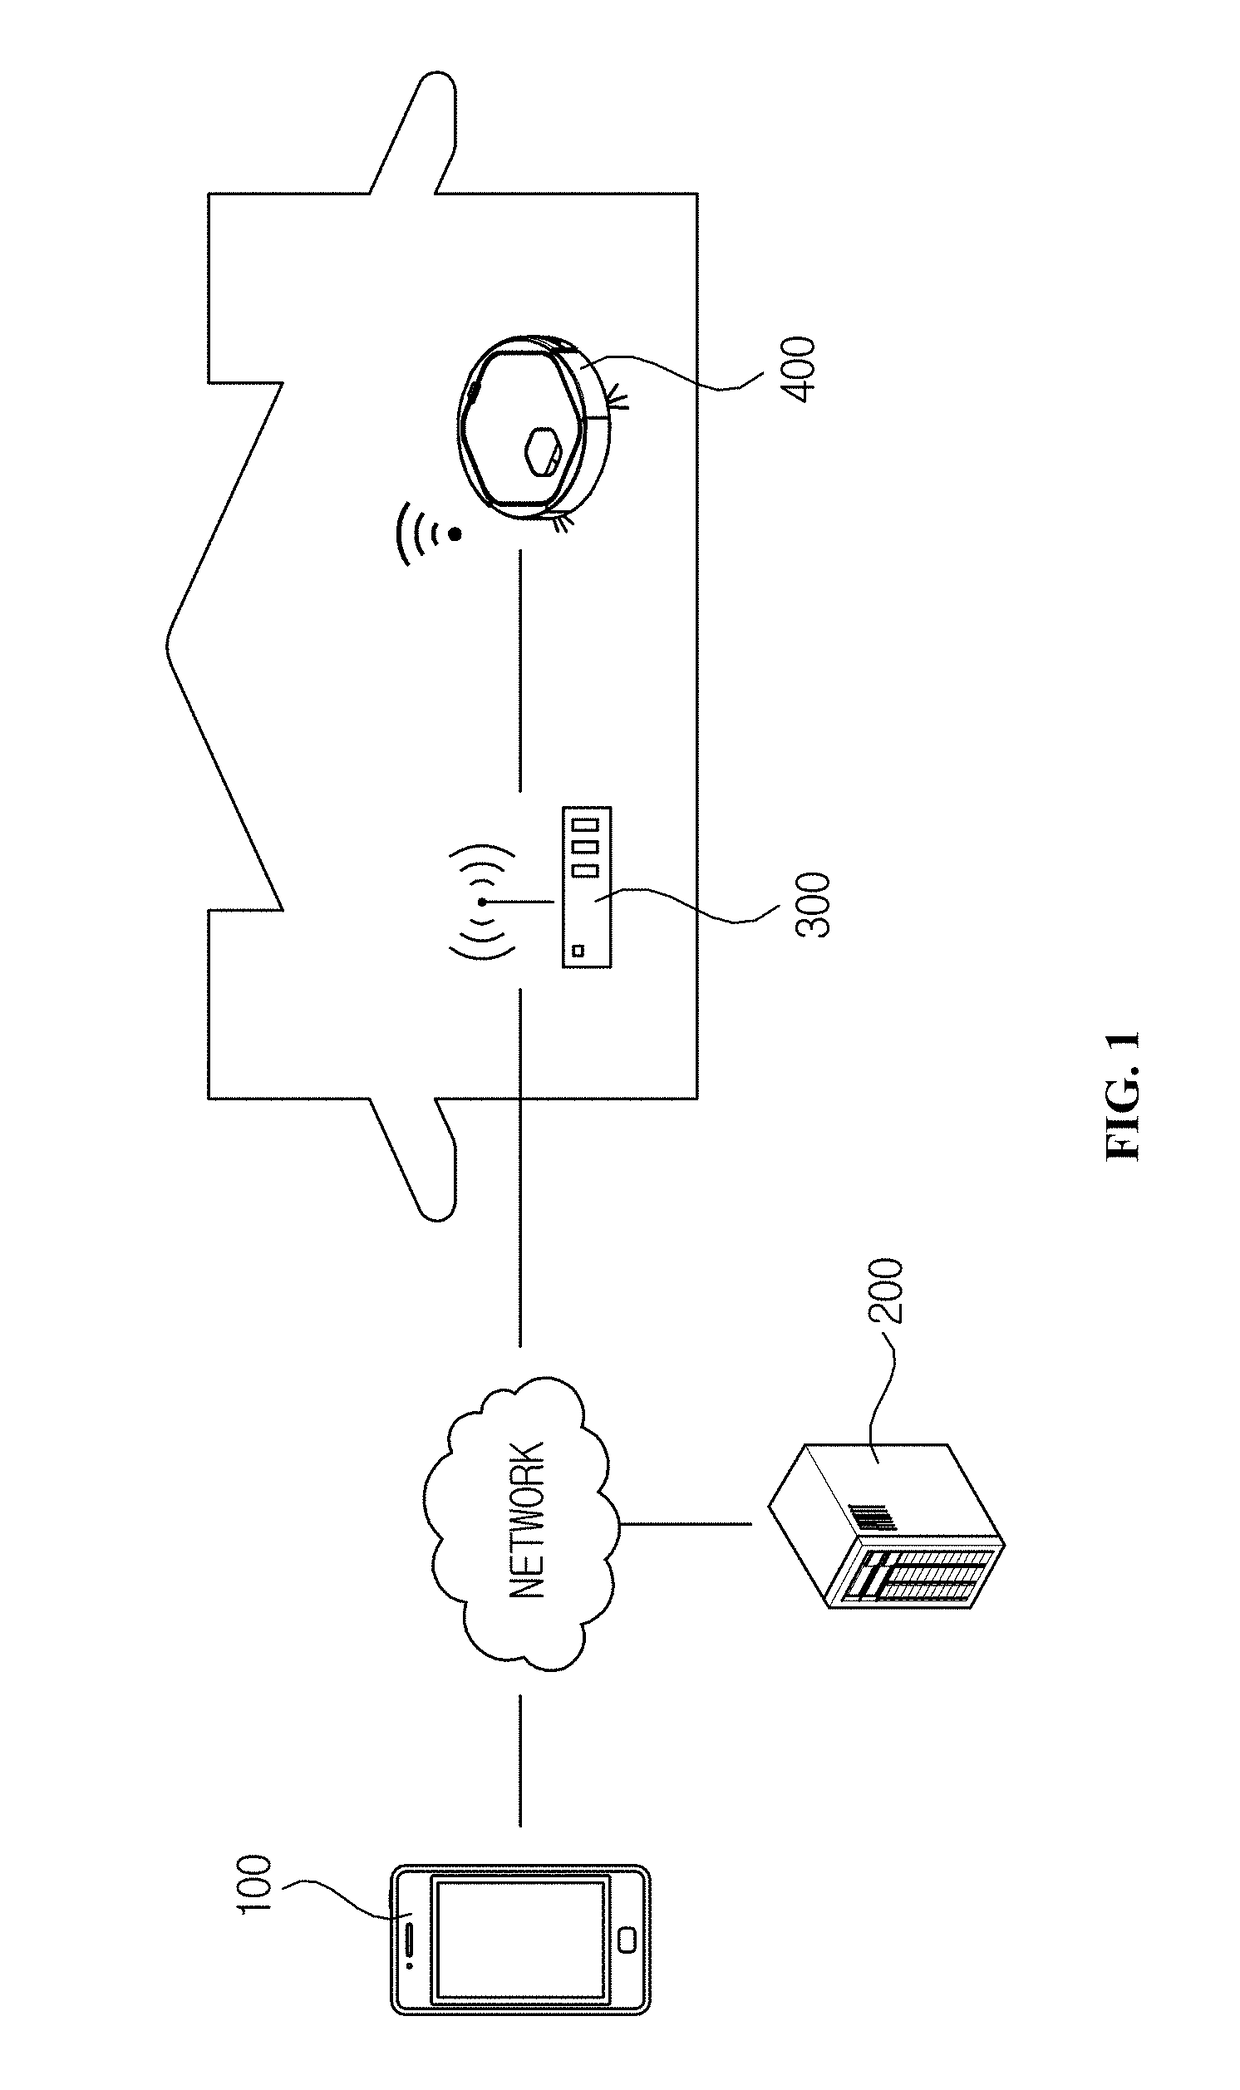 System for operating mobile robot based on complex map information and operating method thereof